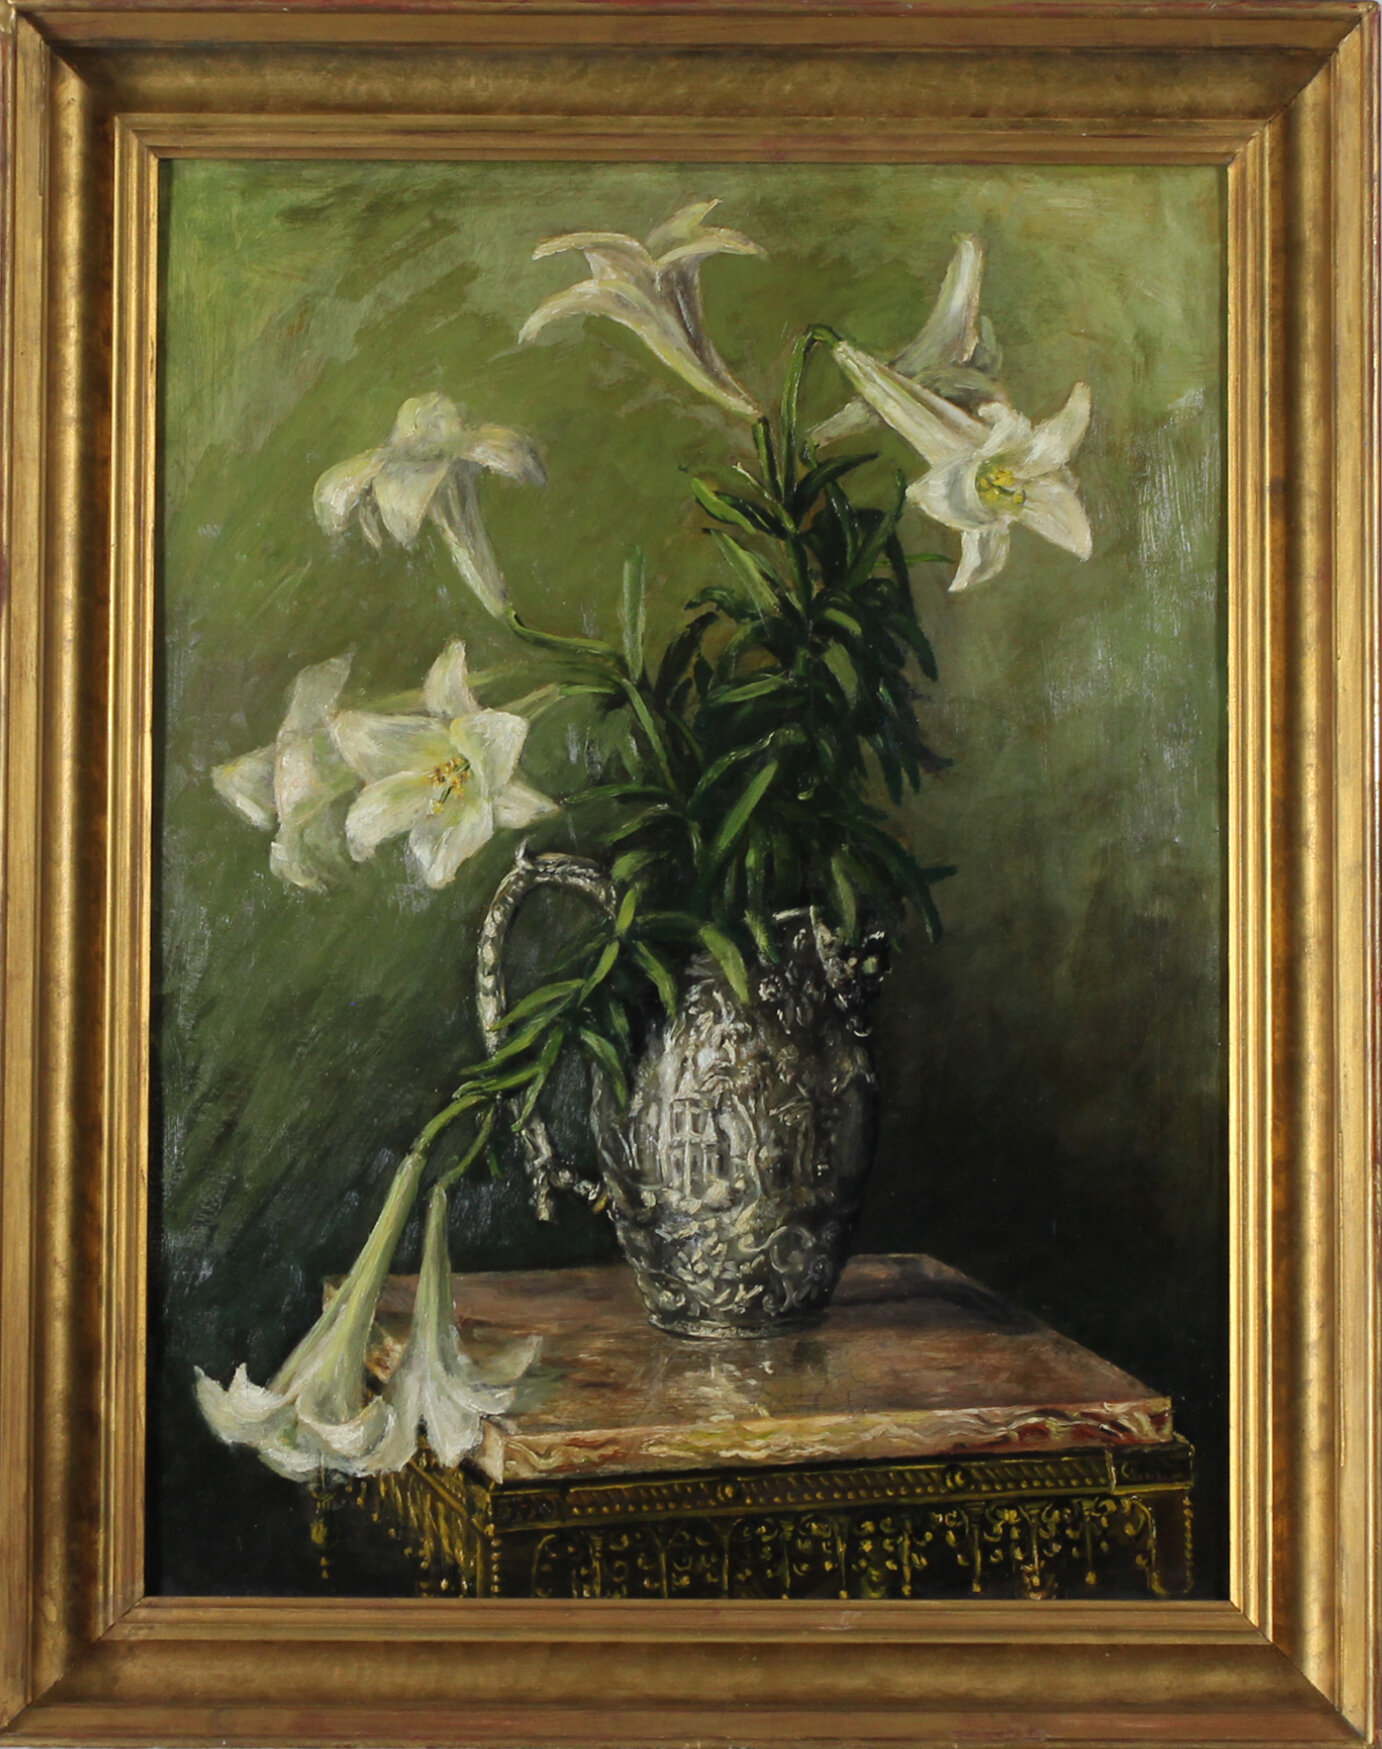 ELSIE MOTZ LOWDEN, (no title), n.d., oil on board, Collection of The Grace Museum, Gift of Alice L. McGowan